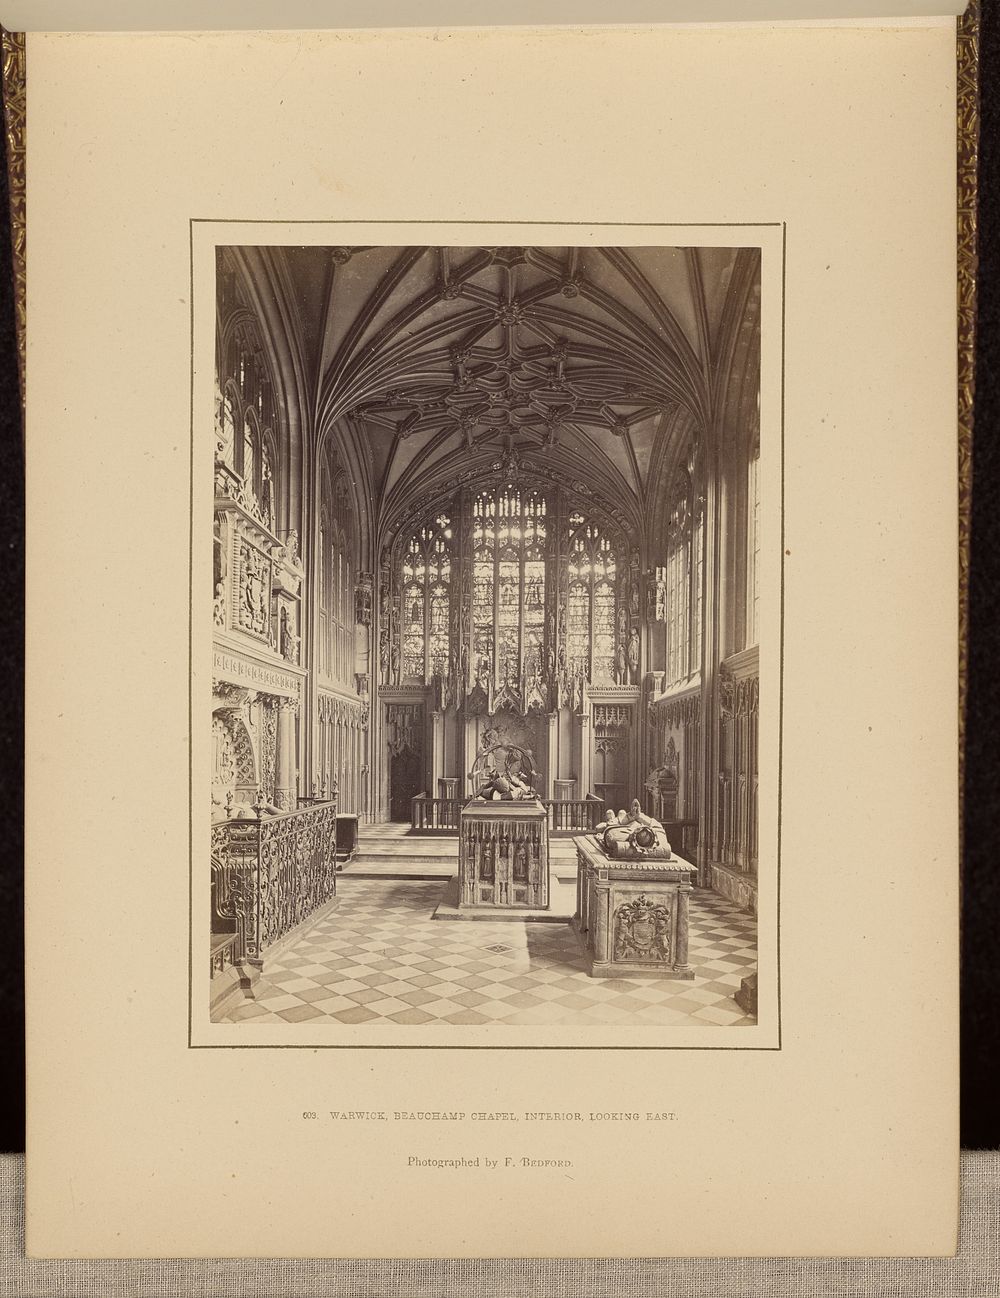 Warwick, Beauchamp Chapel, interior, looking east by Francis Bedford